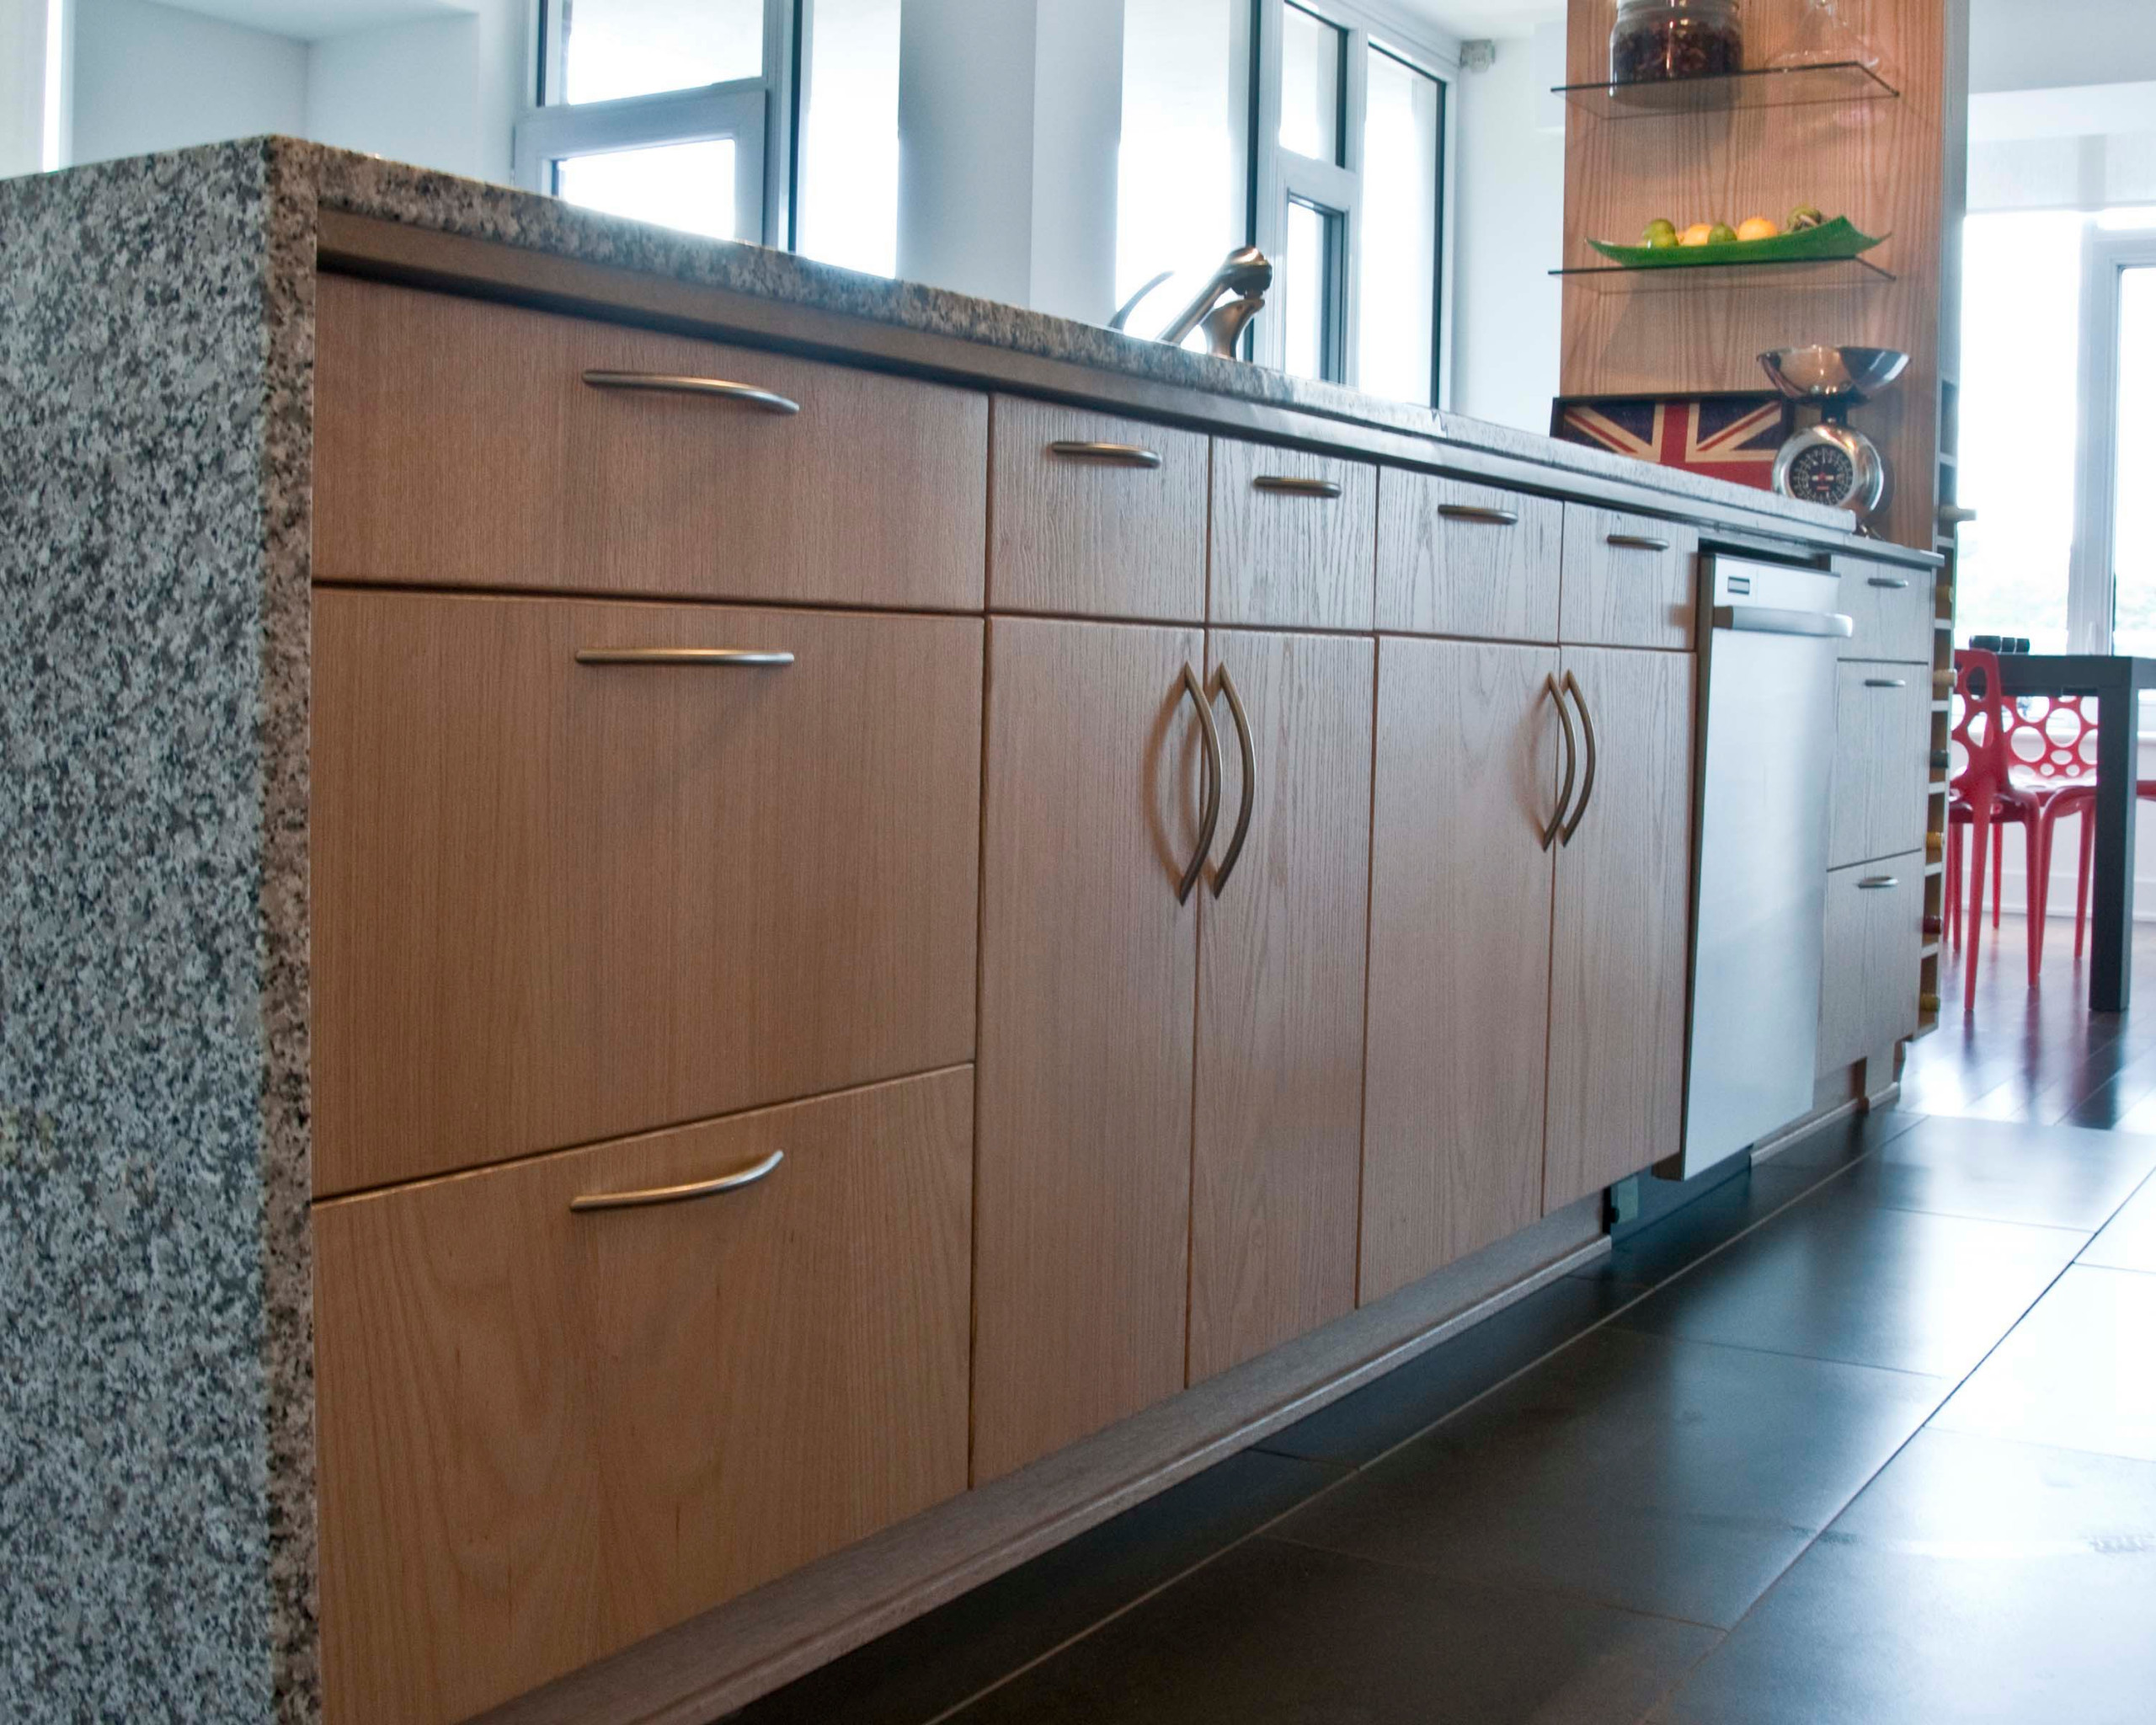 A kitchen island with varying sizes of door pulls